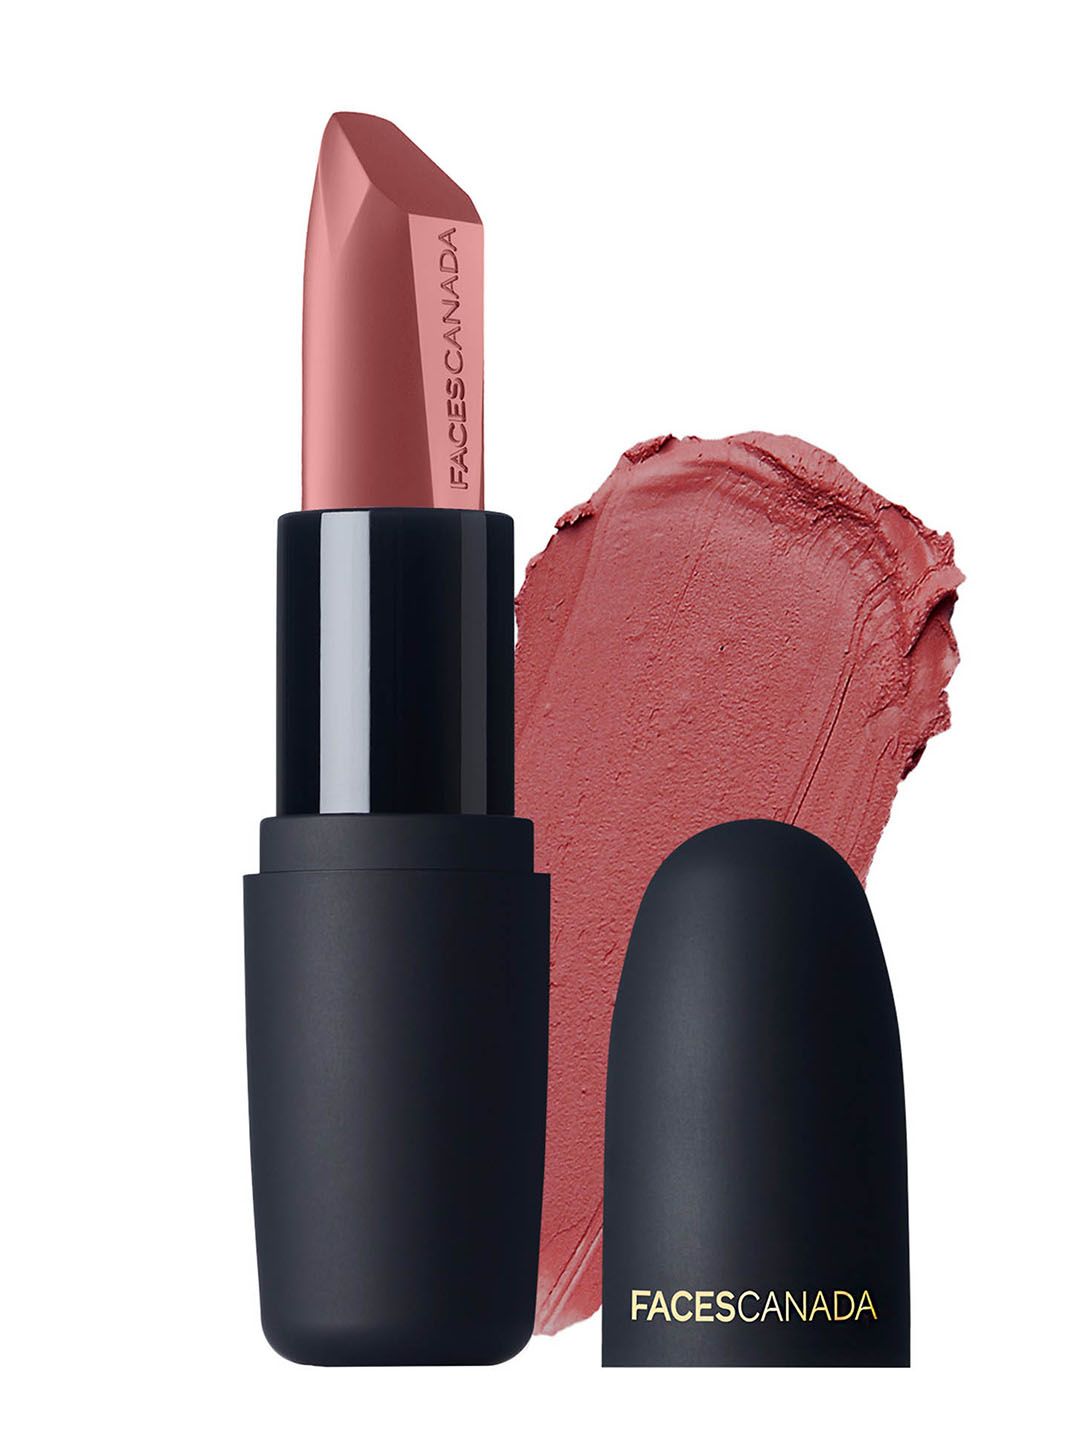 FACES CANADA Weightless Matte Finish Lipstick Peach Candy 14 4gm Price in India